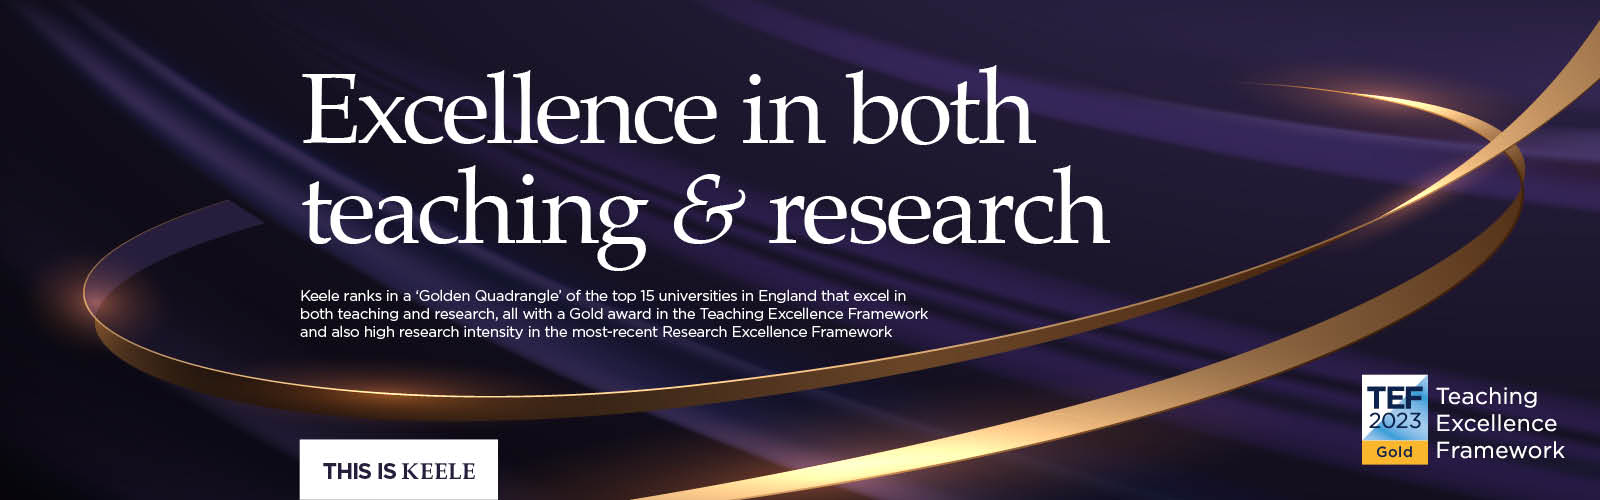 Keele ranks in a ‘Golden Quadrangle’ of the top 15 universities in England that excel in both teaching and research, all with a Gold award in the Teaching Excellence Framework and also high research intensity in the most-recent Research Excellence Framework